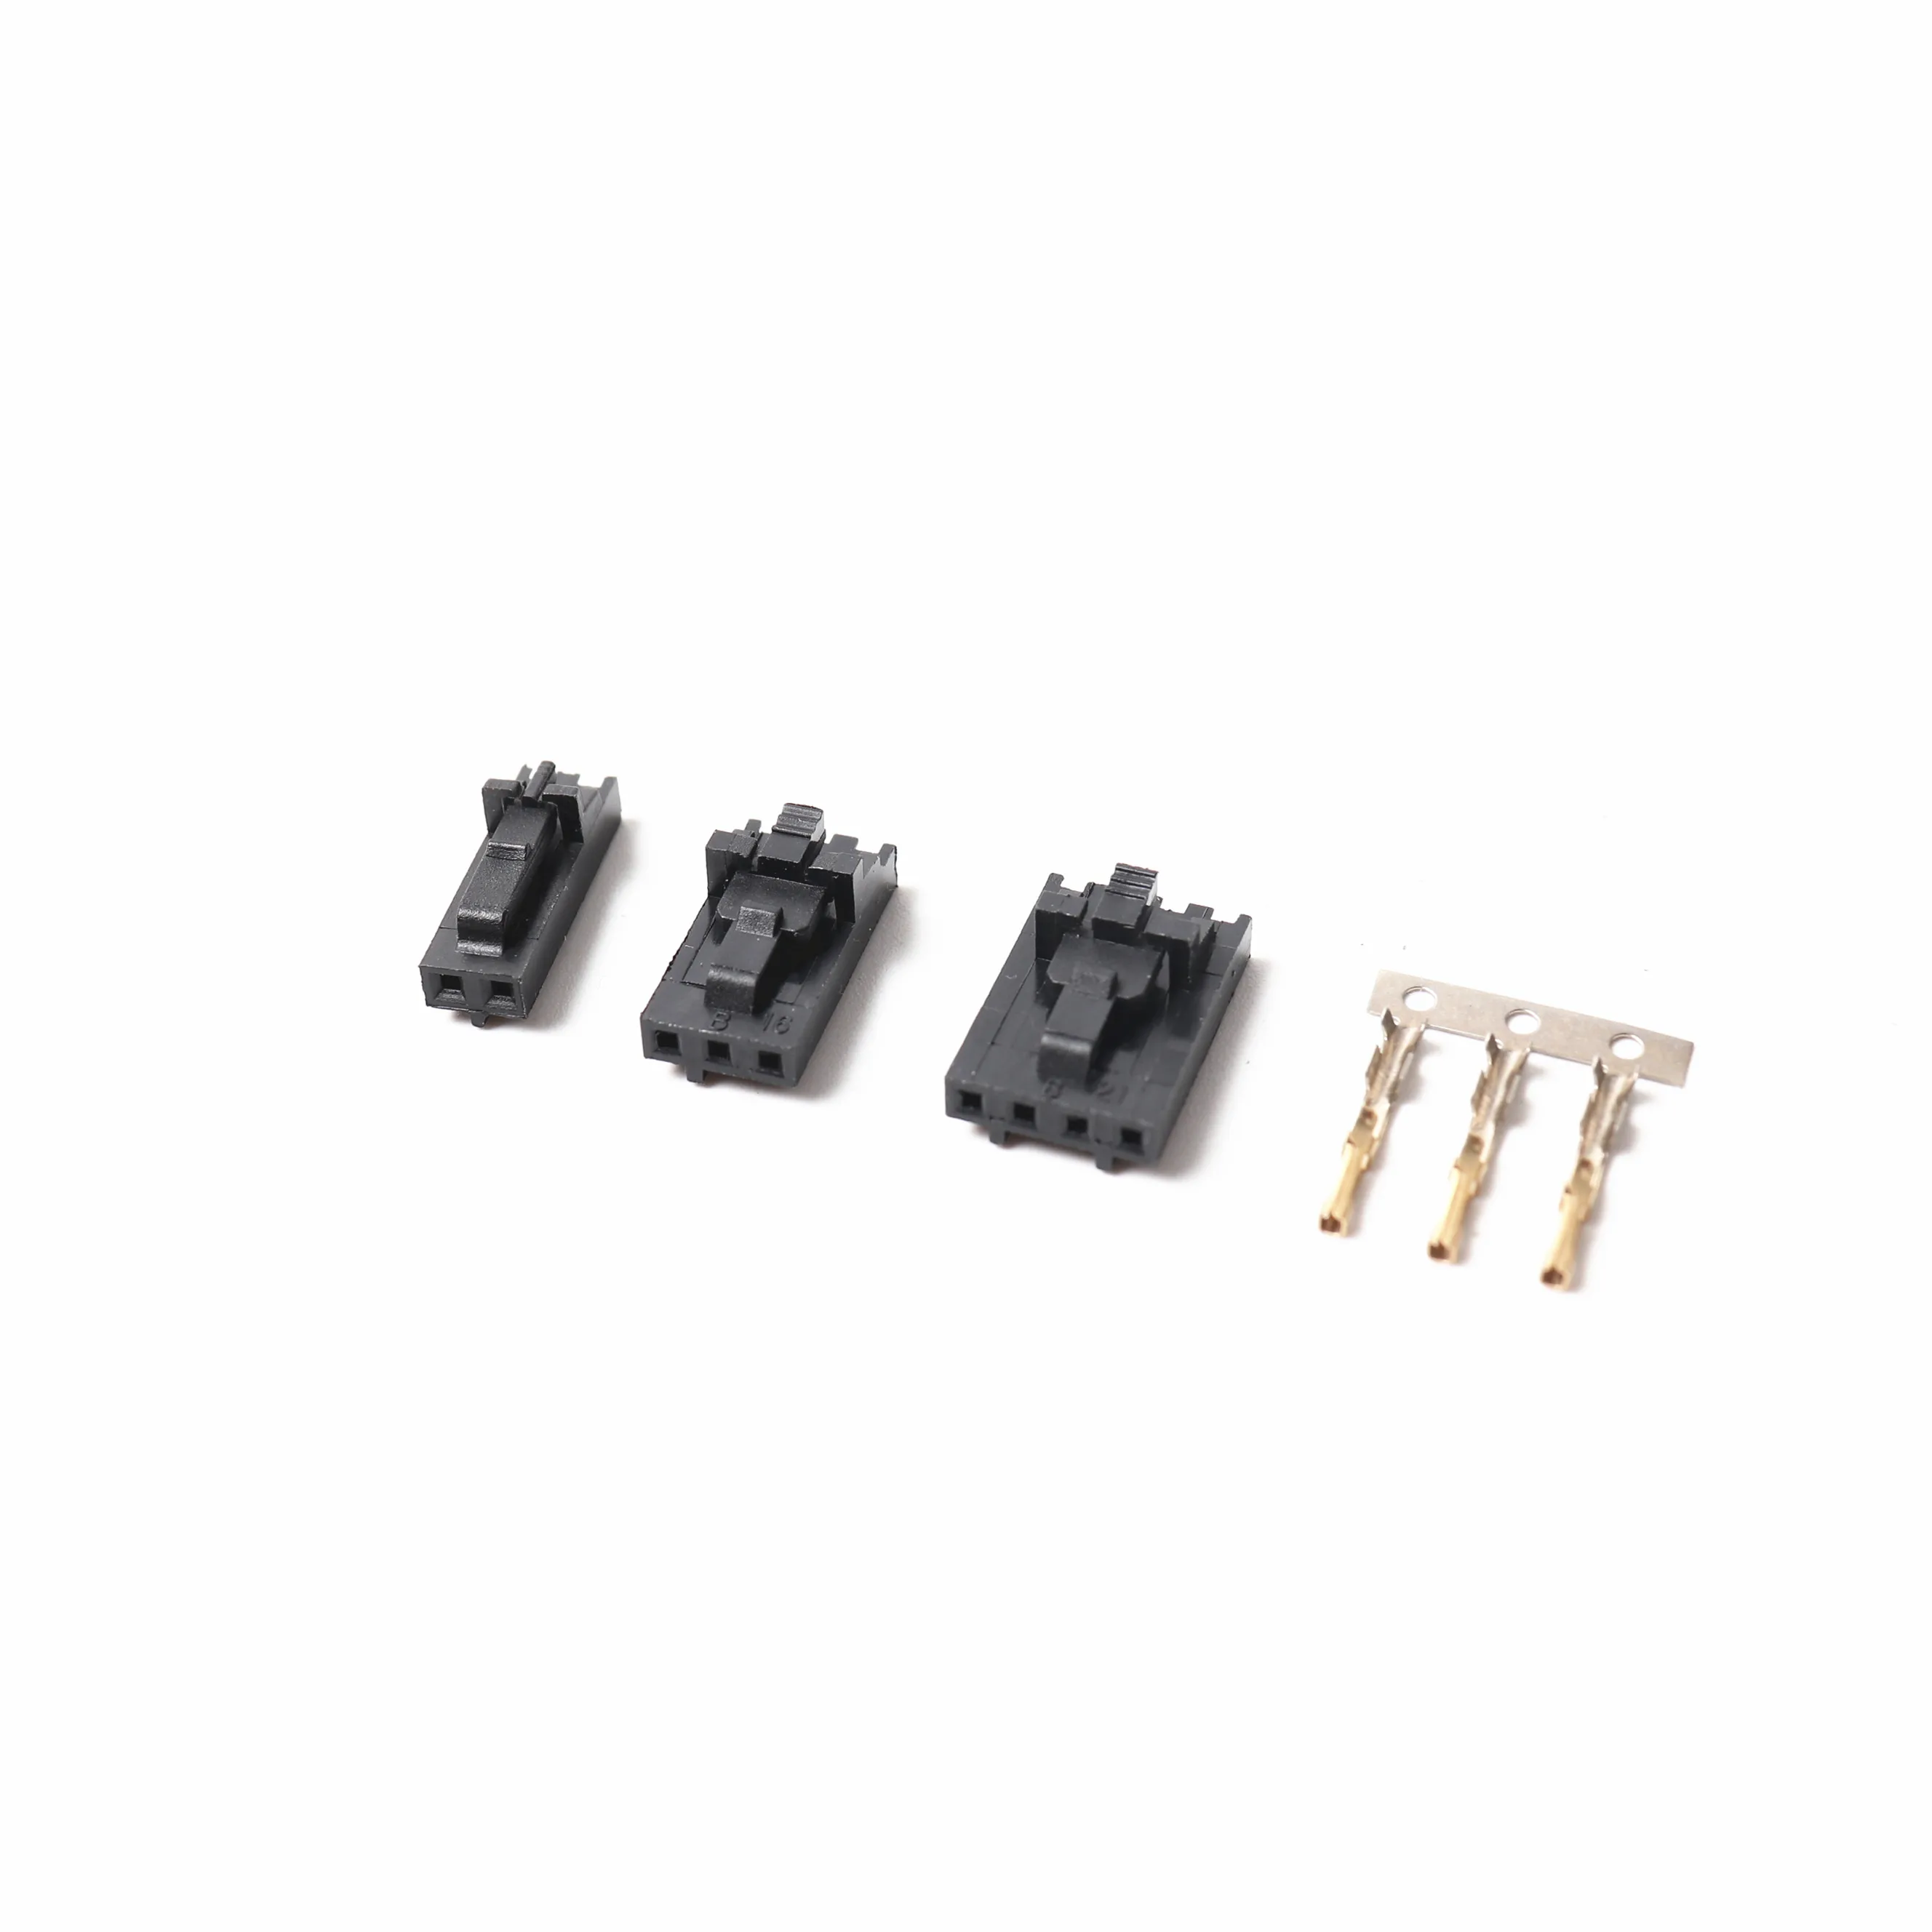 

2.54mm 1x2/1x3/1x4 Connector & Positive Latch Housing Kit- 10 pack for Mini-rambo/Einsy Rambo boards and Prusa i3 mk2s/mk3